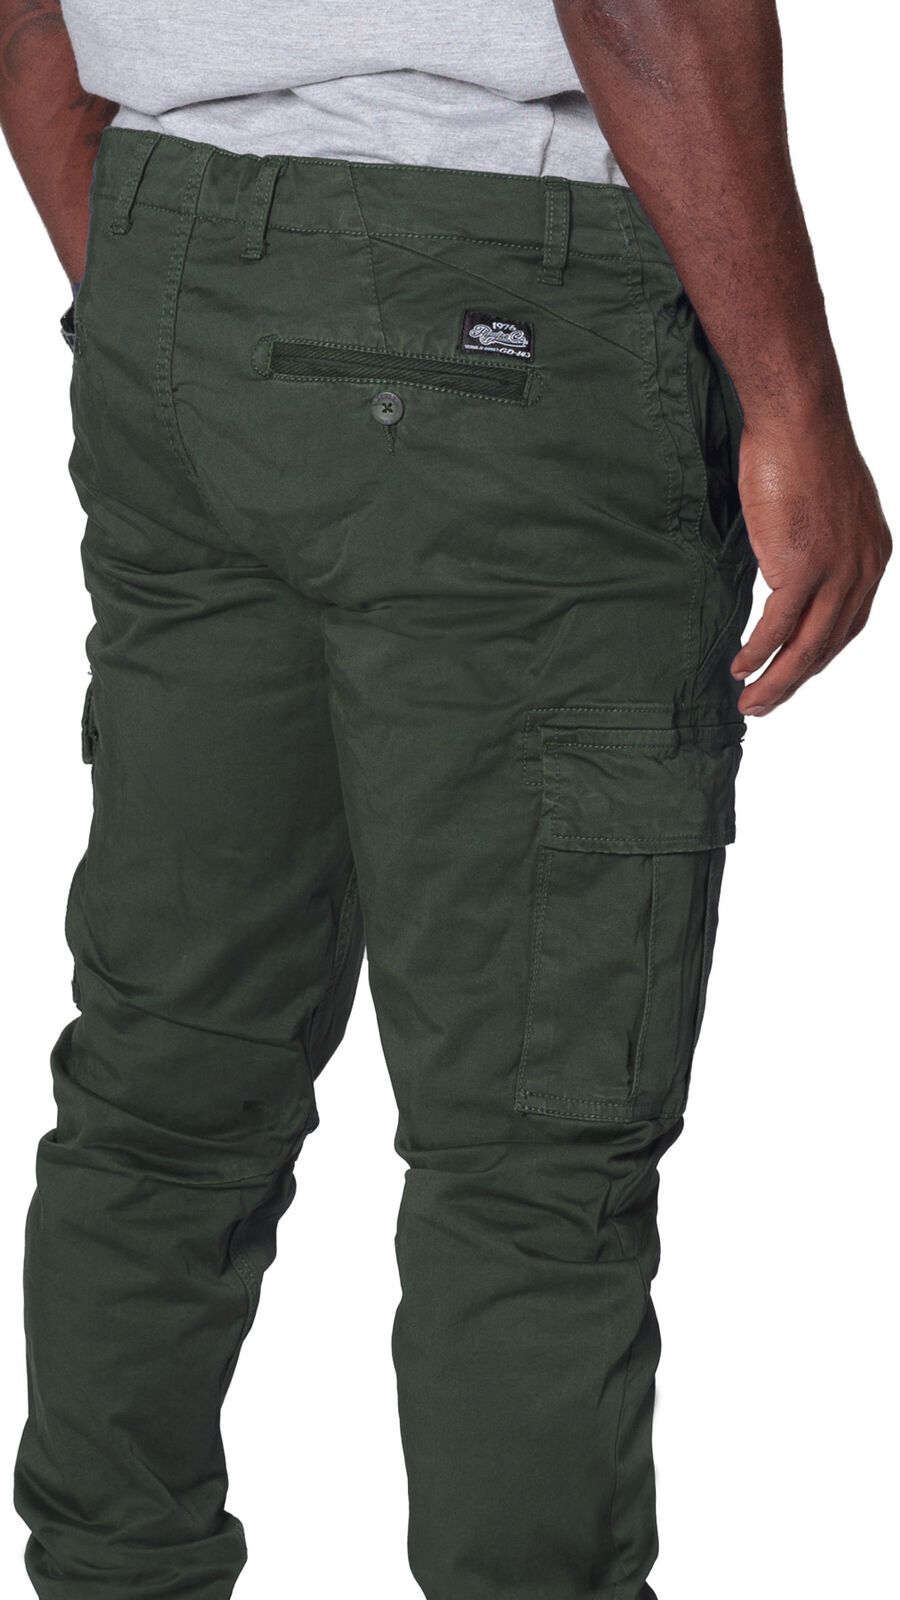 Angled rear focus of cargo trousers, with clear view of stitching, rear and cargo pockets and slightly stretchy khaki-green material.